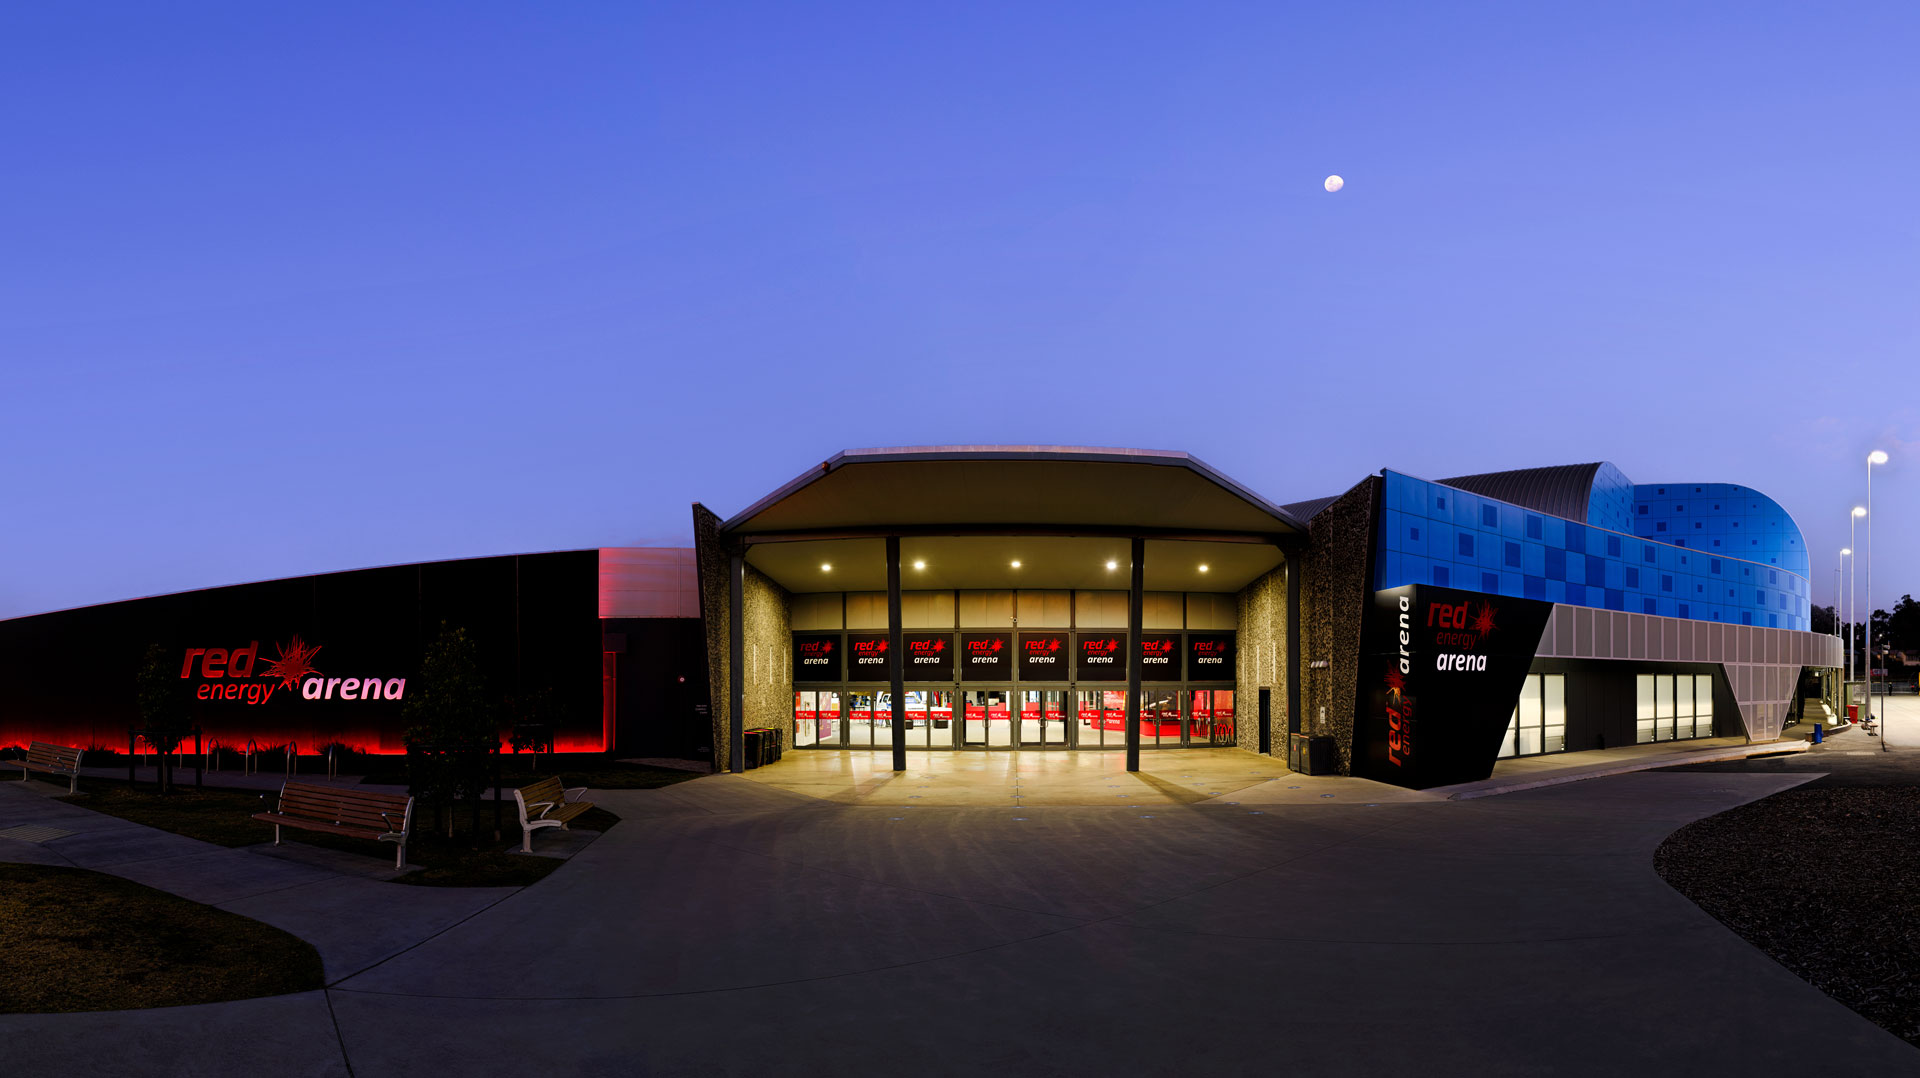 Red energy Arena Exterior